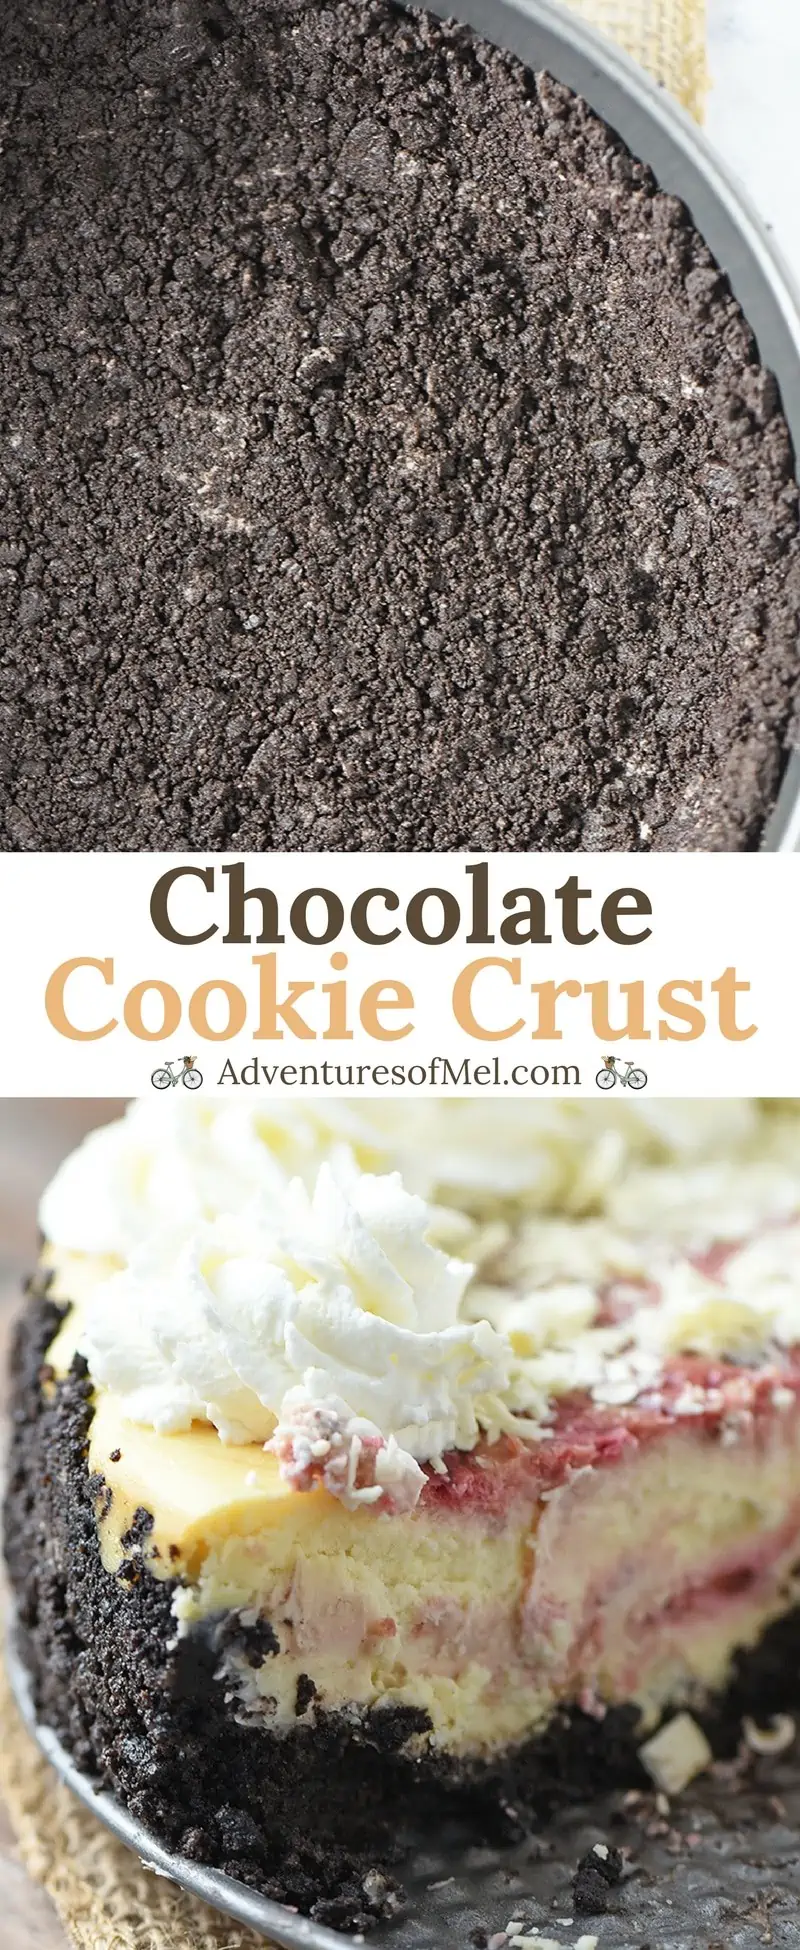 Chocolate Cookie Crust for Simple Desserts